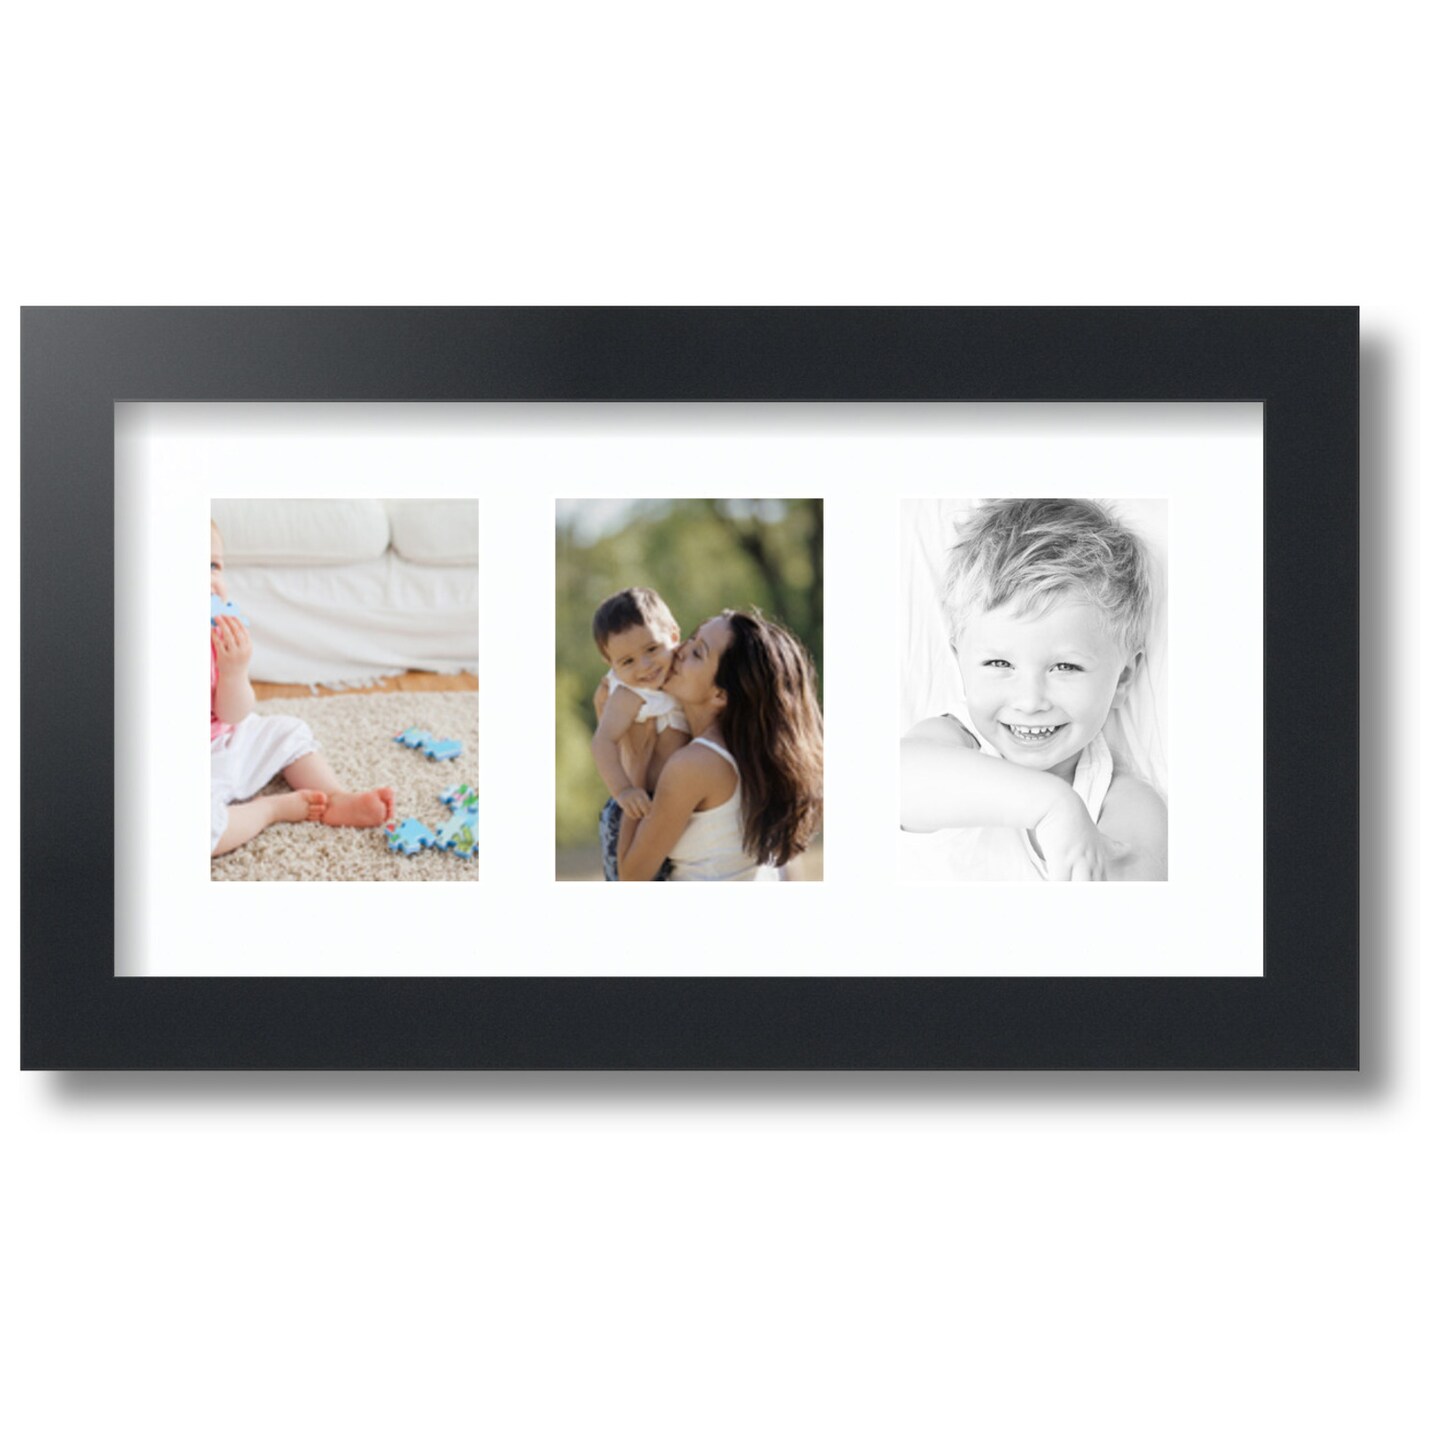 ArtToFrames Collage Photo Picture Frame with 3 - 3.5x5 inch Openings, Framed in Black with Over 62 Mat Color Options and Regular Glass (CSM-3926-29)